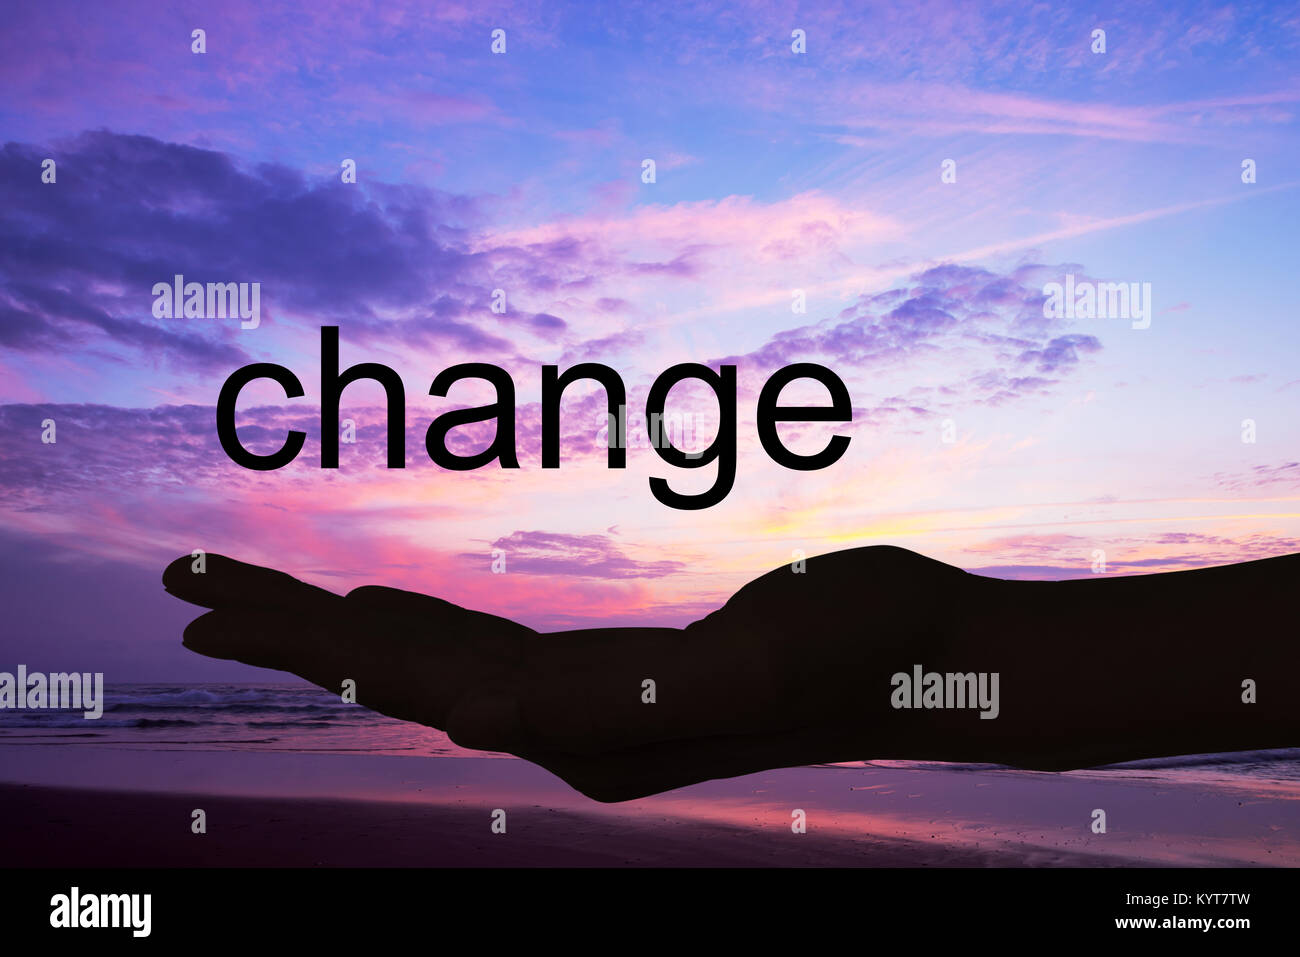 Hand offering the word change, sunset background Stock Photo